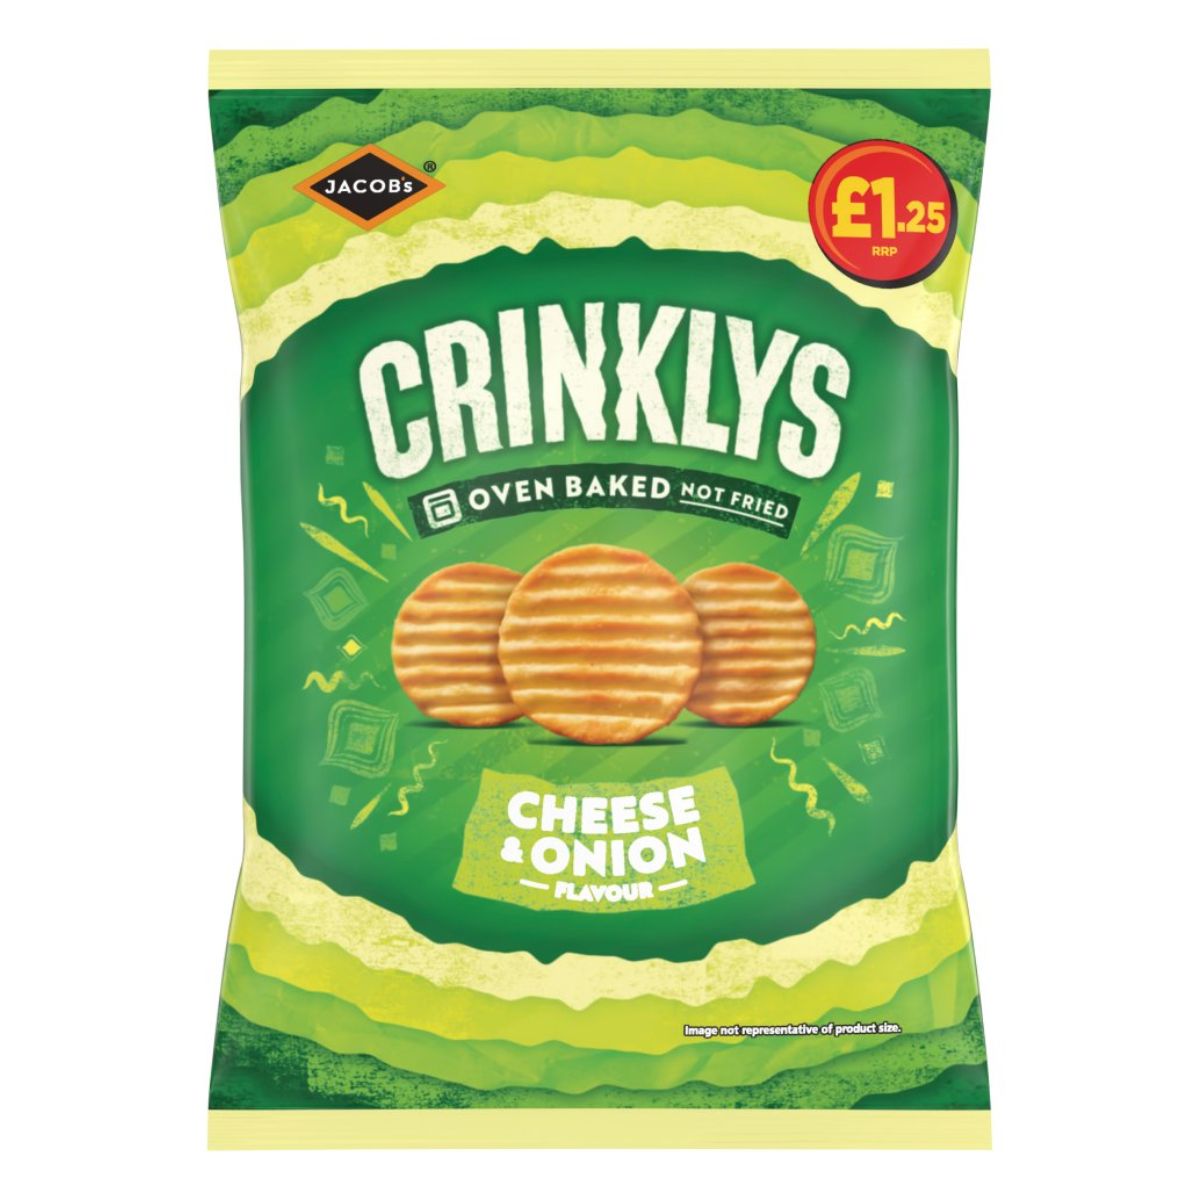 A package of Jacobs - Crinklys Cheese & Onion Snacks, highlighting that they are oven baked, not fried, with a price tag of £1.25.